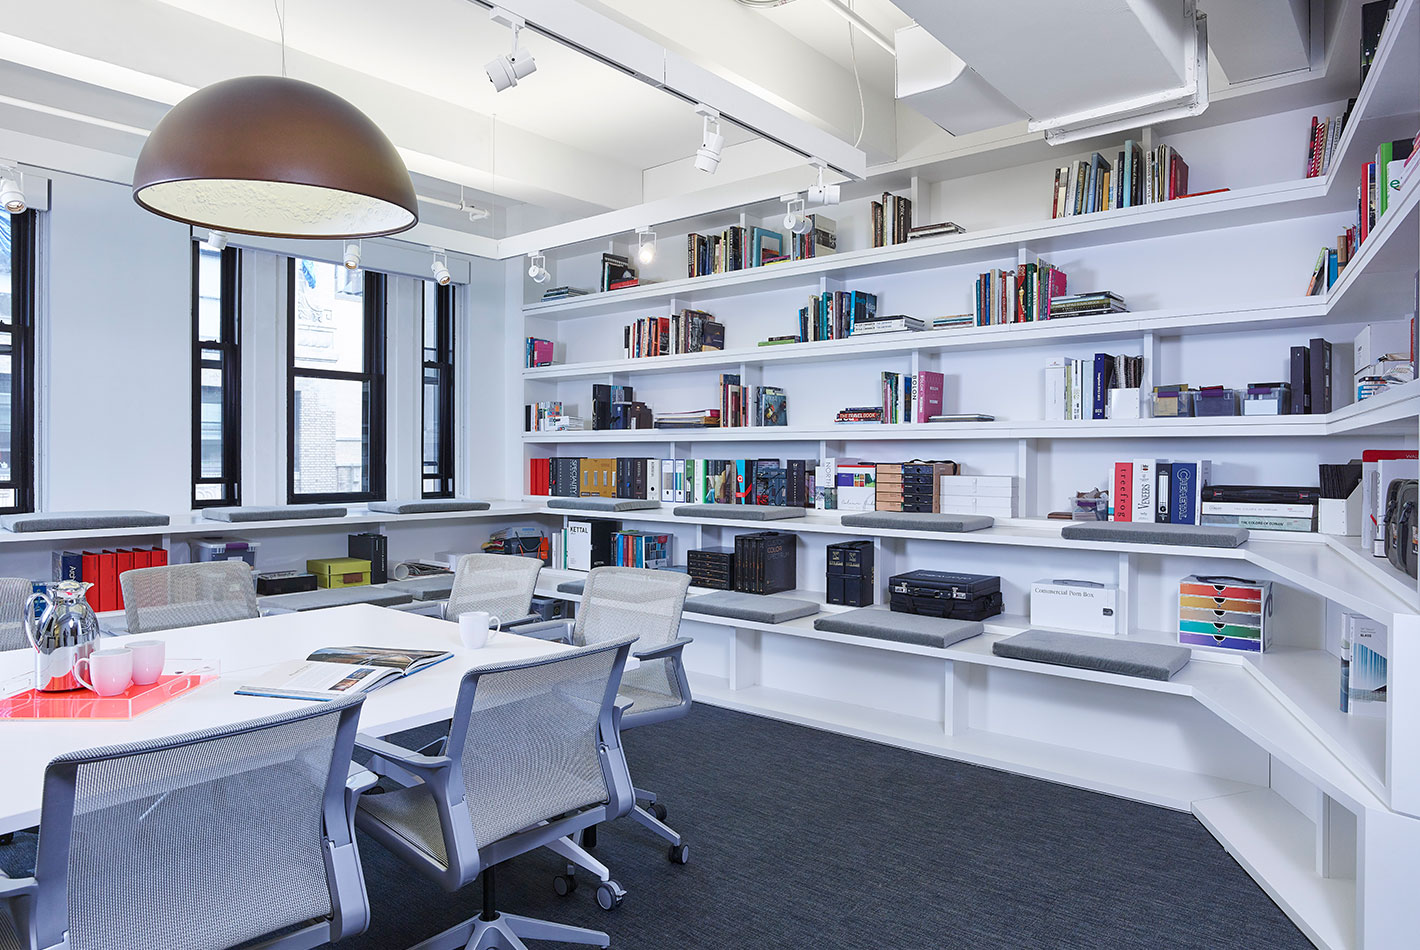 A pure white conference room with multiple shelving spaces and modern furniture at the Starwood Design Studio